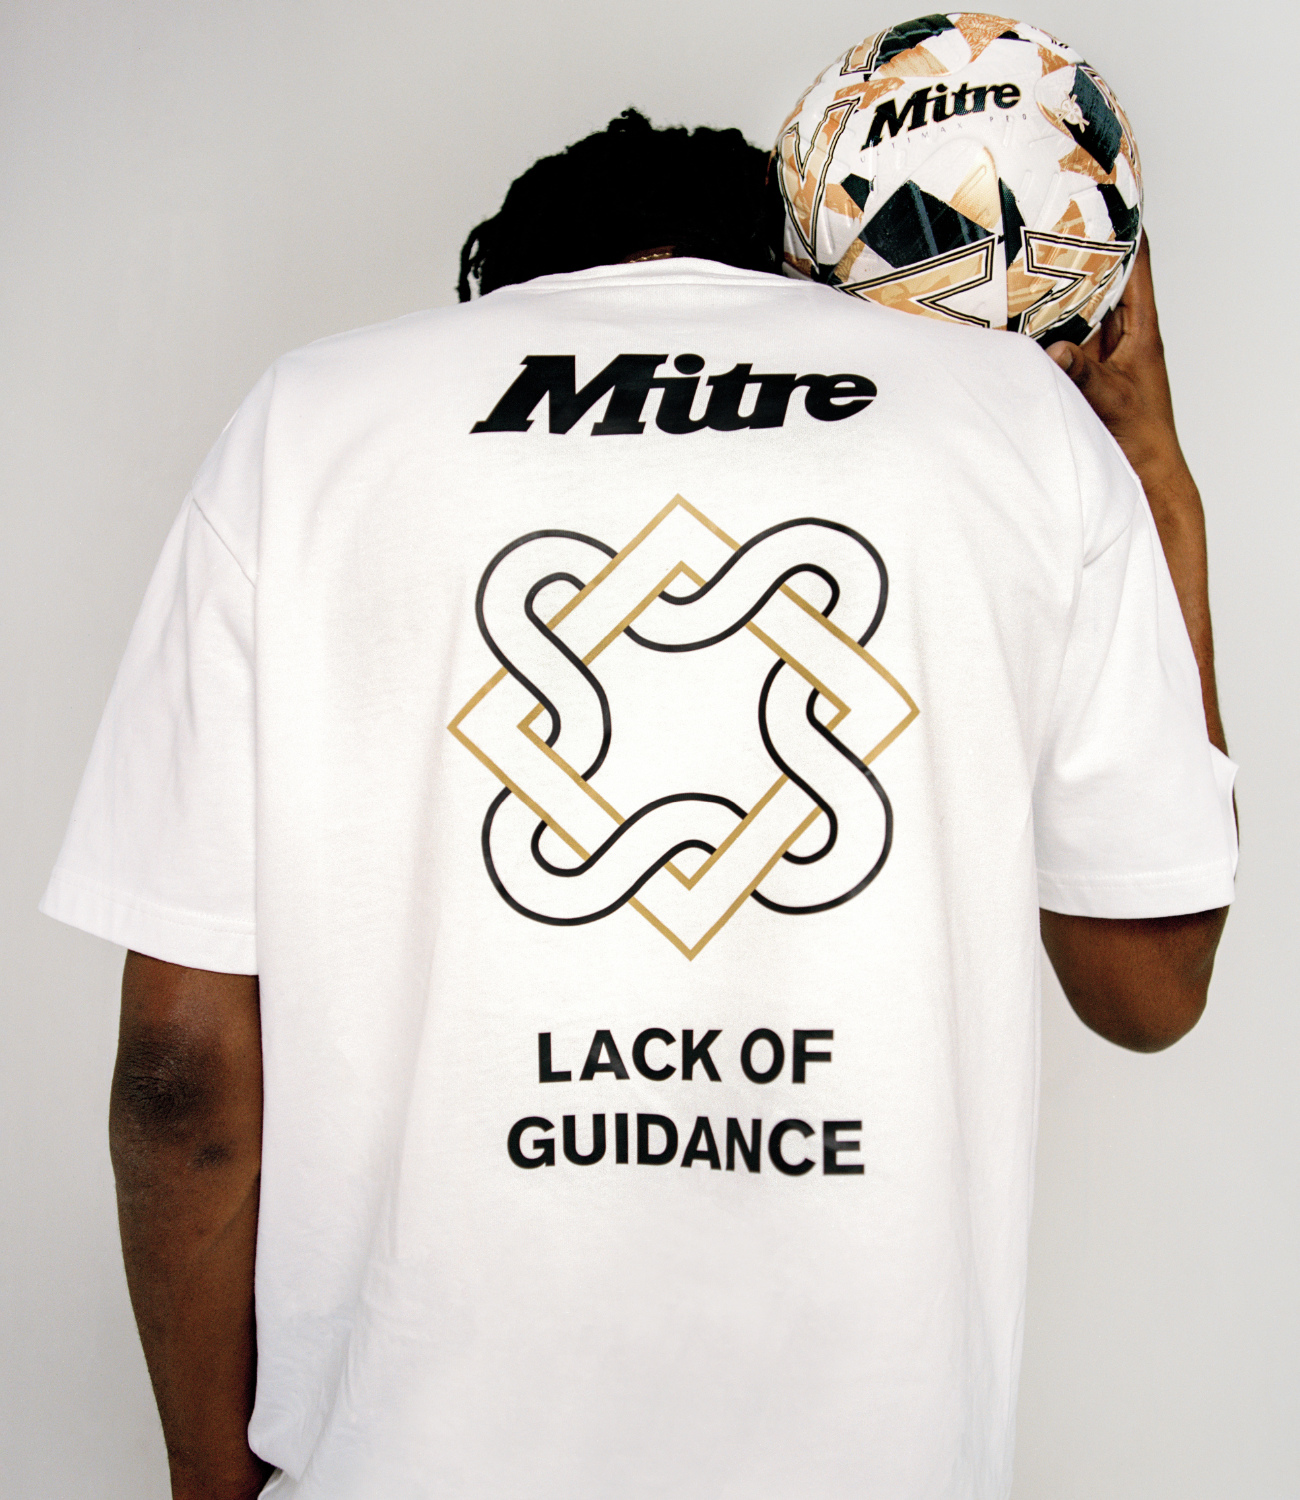 Lack of Guidance x Mitre Fall/Winter 2023 collaboration.